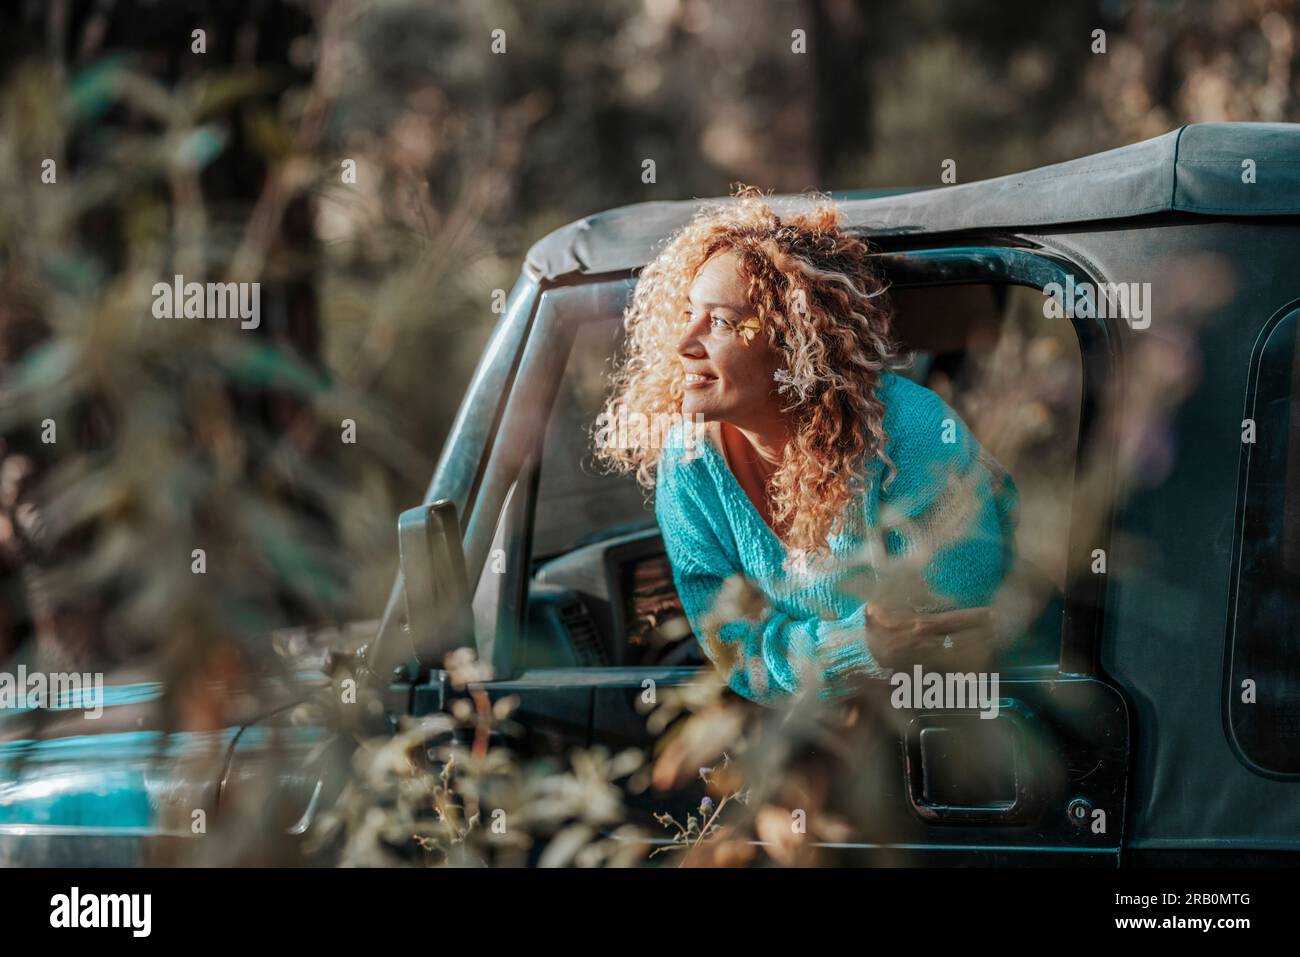 Travel and freedom adventure with car and female. One woman enjoying destination outside the window of her car transport. Concept of free lifestyle. Off road car and people. Weekend activity outside Stock Photo